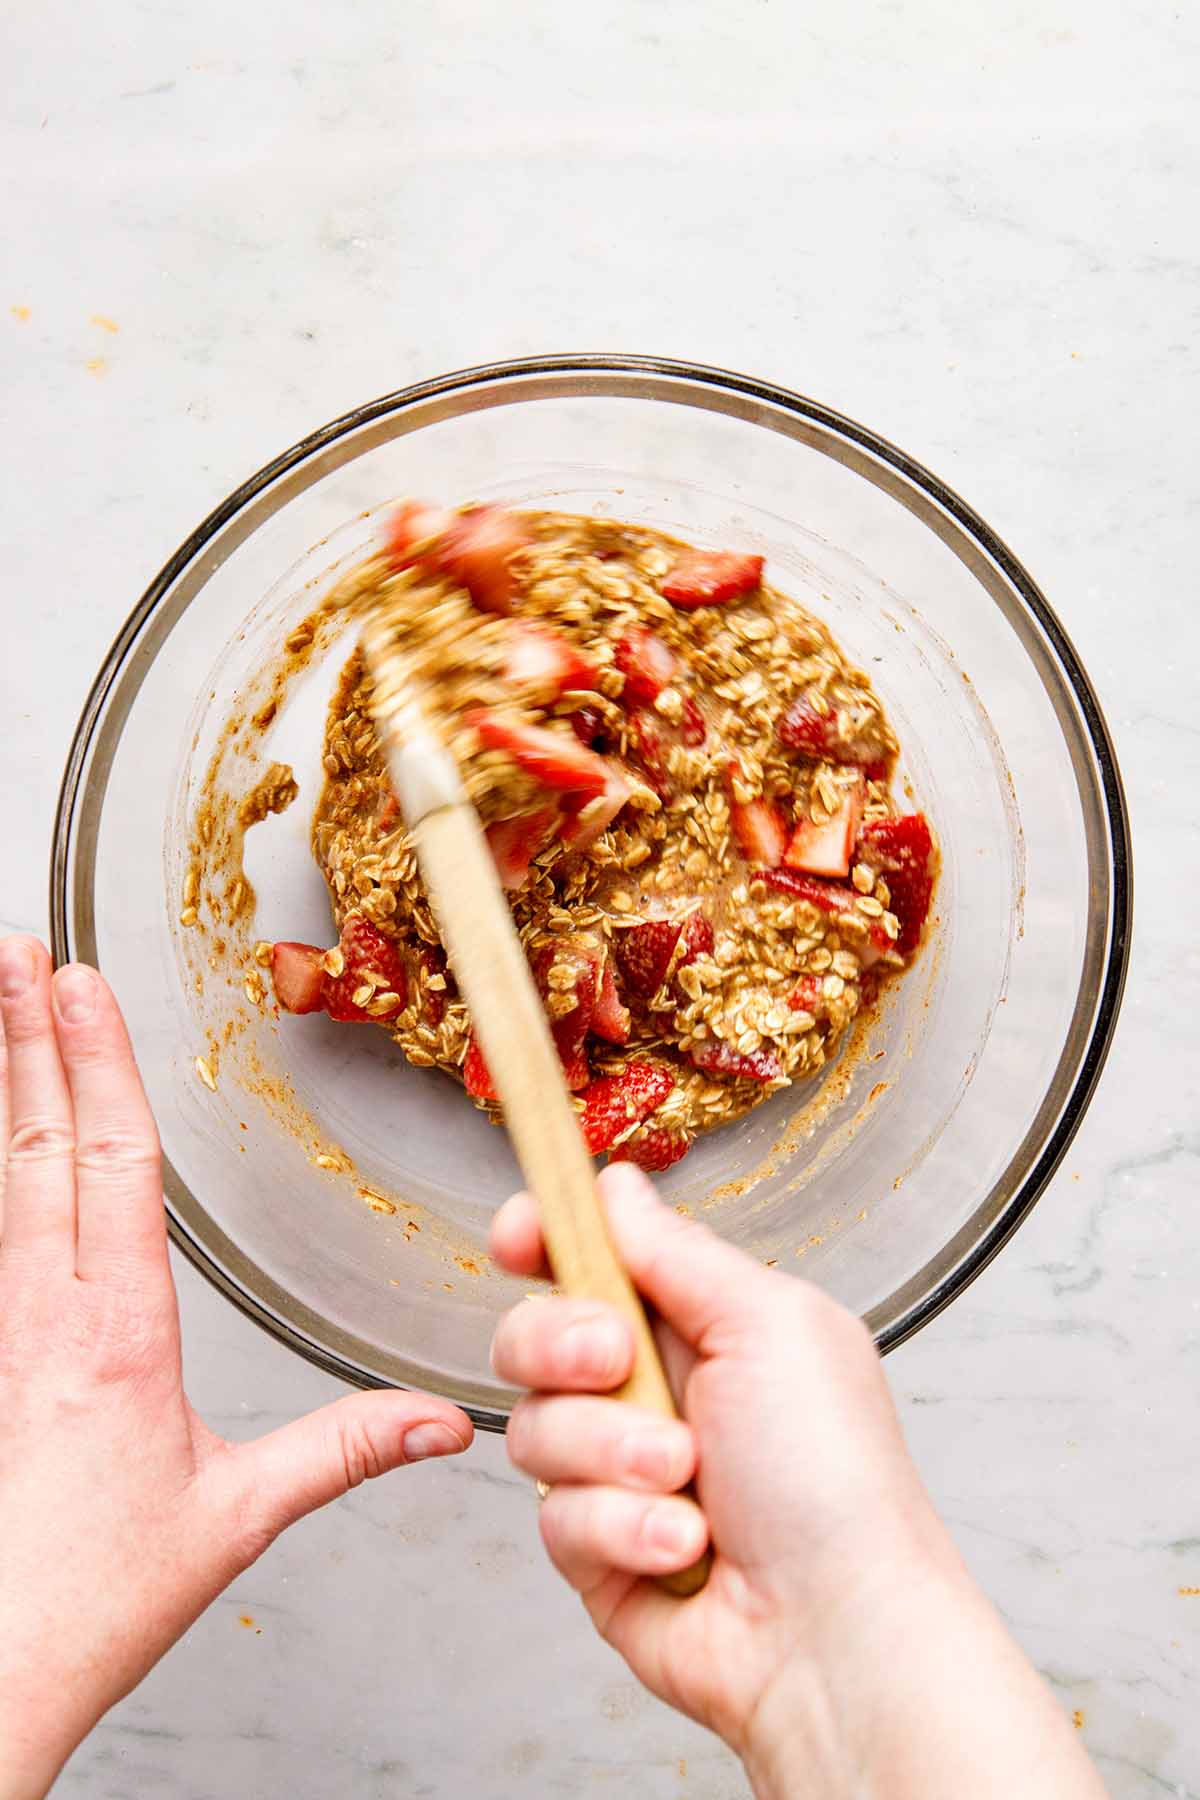 A hand stirring uncooked oatmeal and strawberries together in a bowl with a rubber spatula.